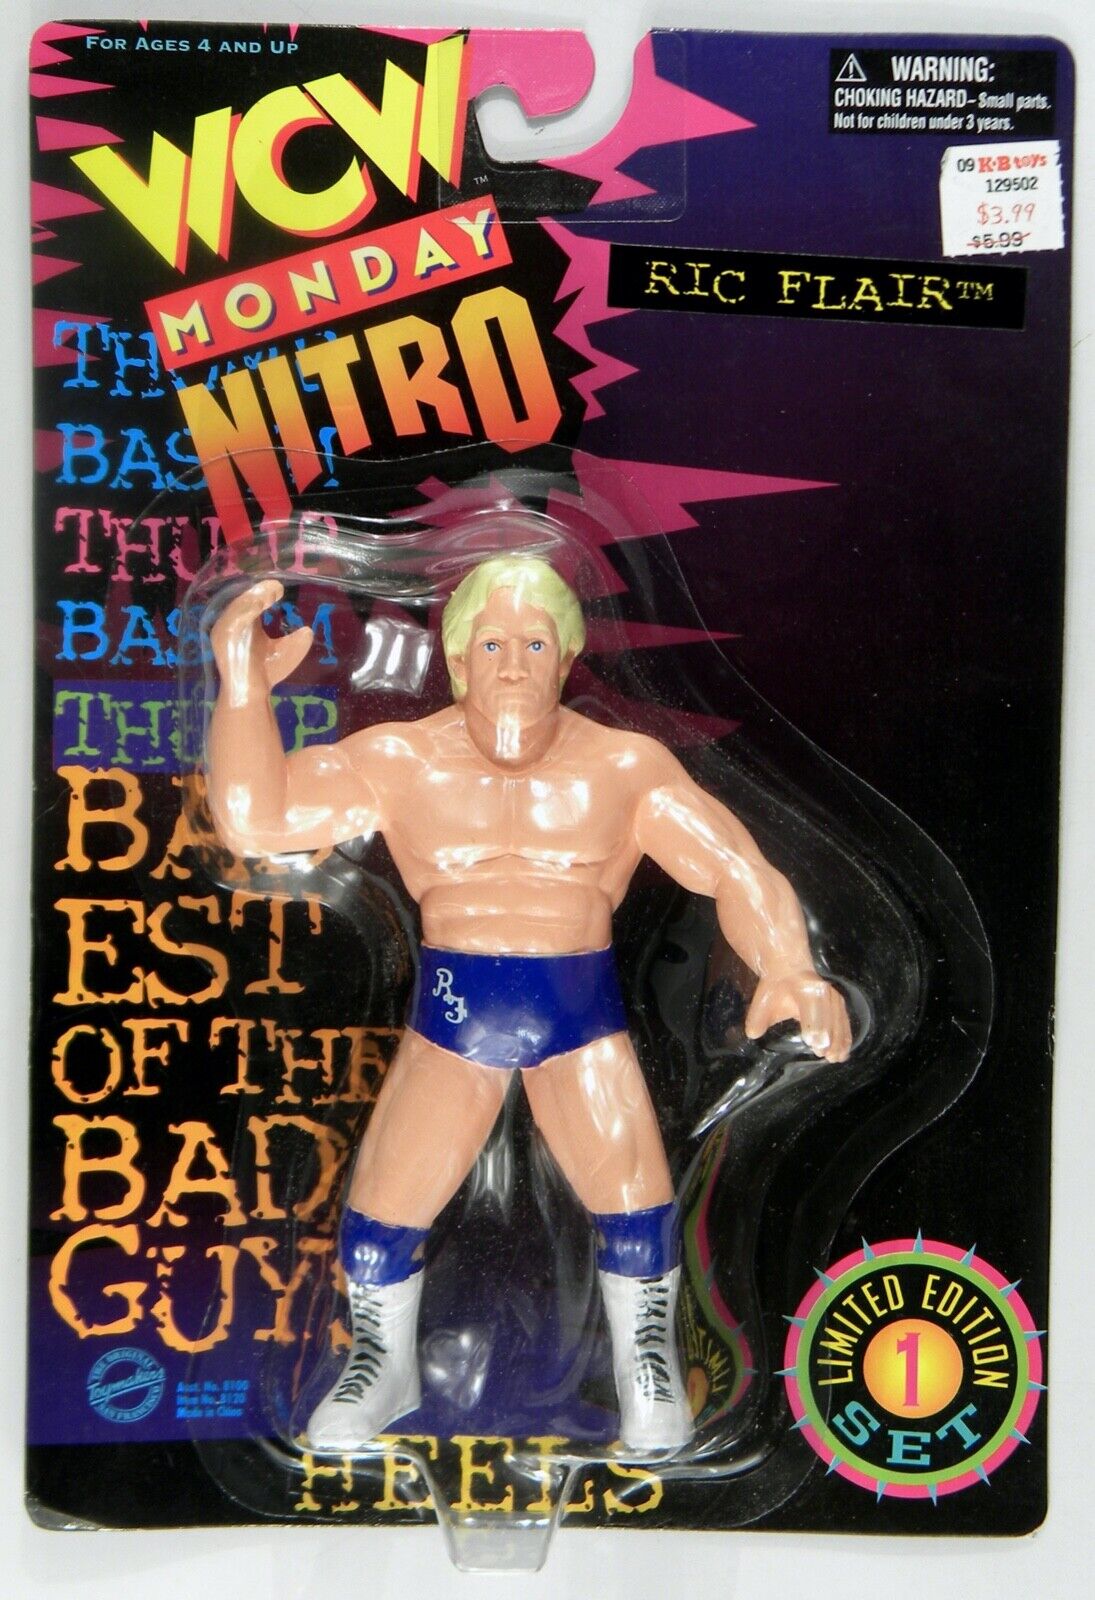 1997 WCW OSFTM Collectible Wrestlers [LJN Style] Limited Edition Set 1 "Heels" Ric Flair